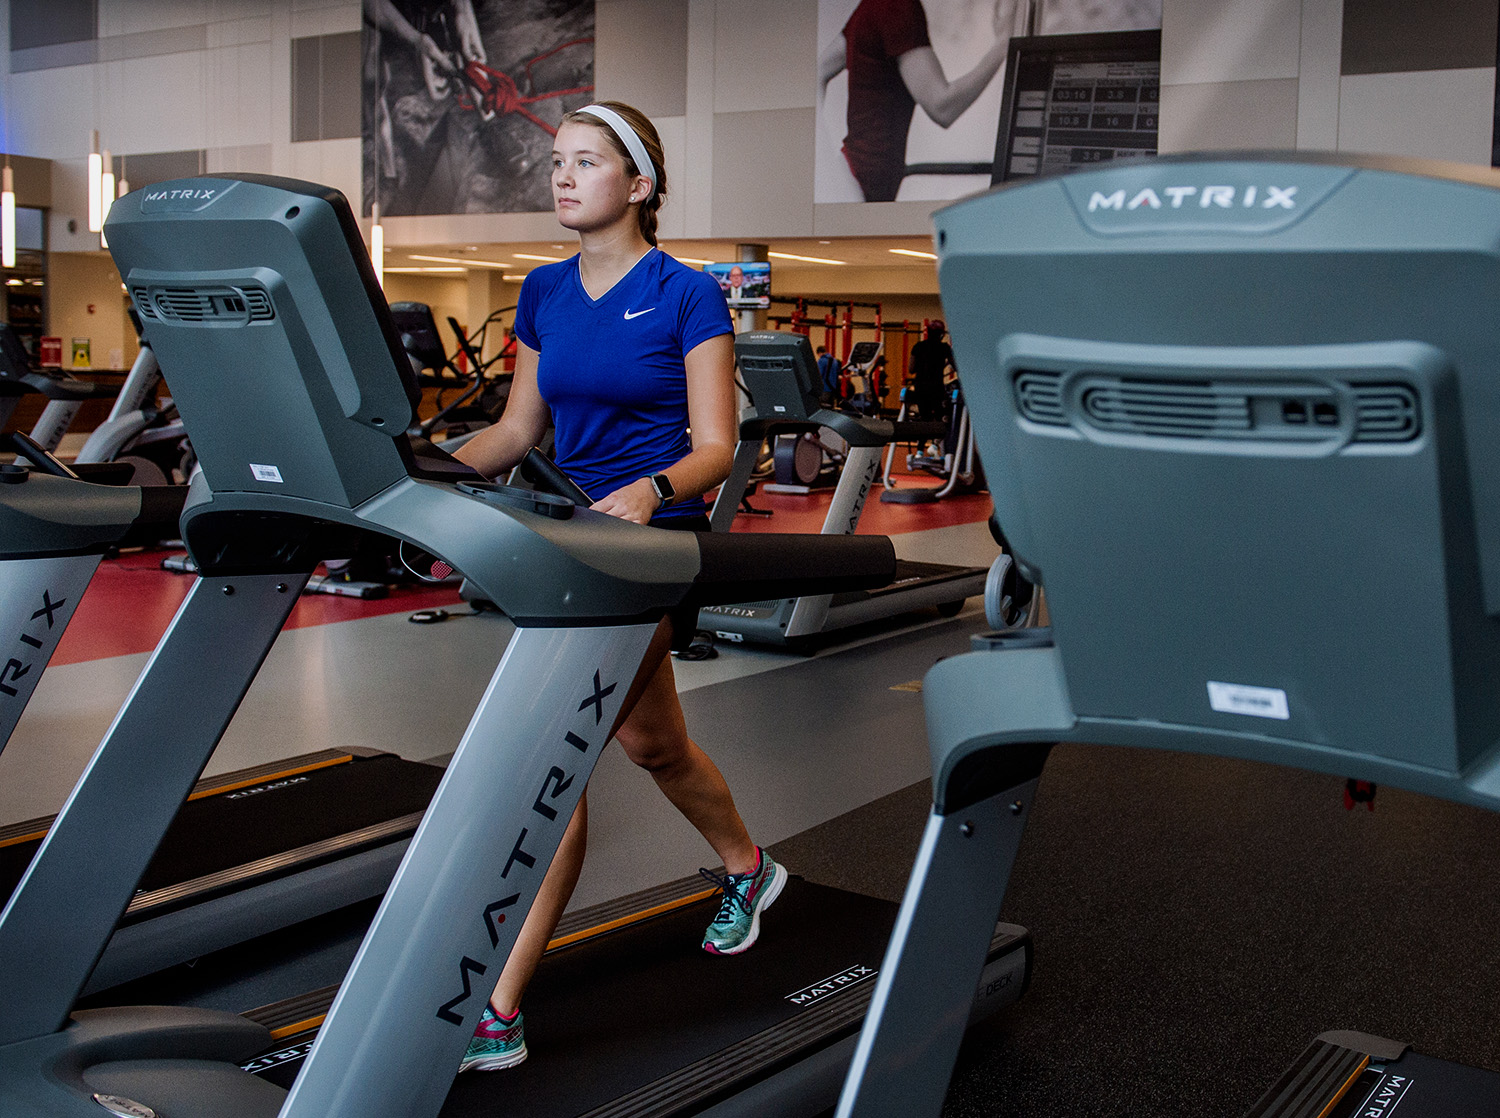 Student walking on a treadmill in the fitness center